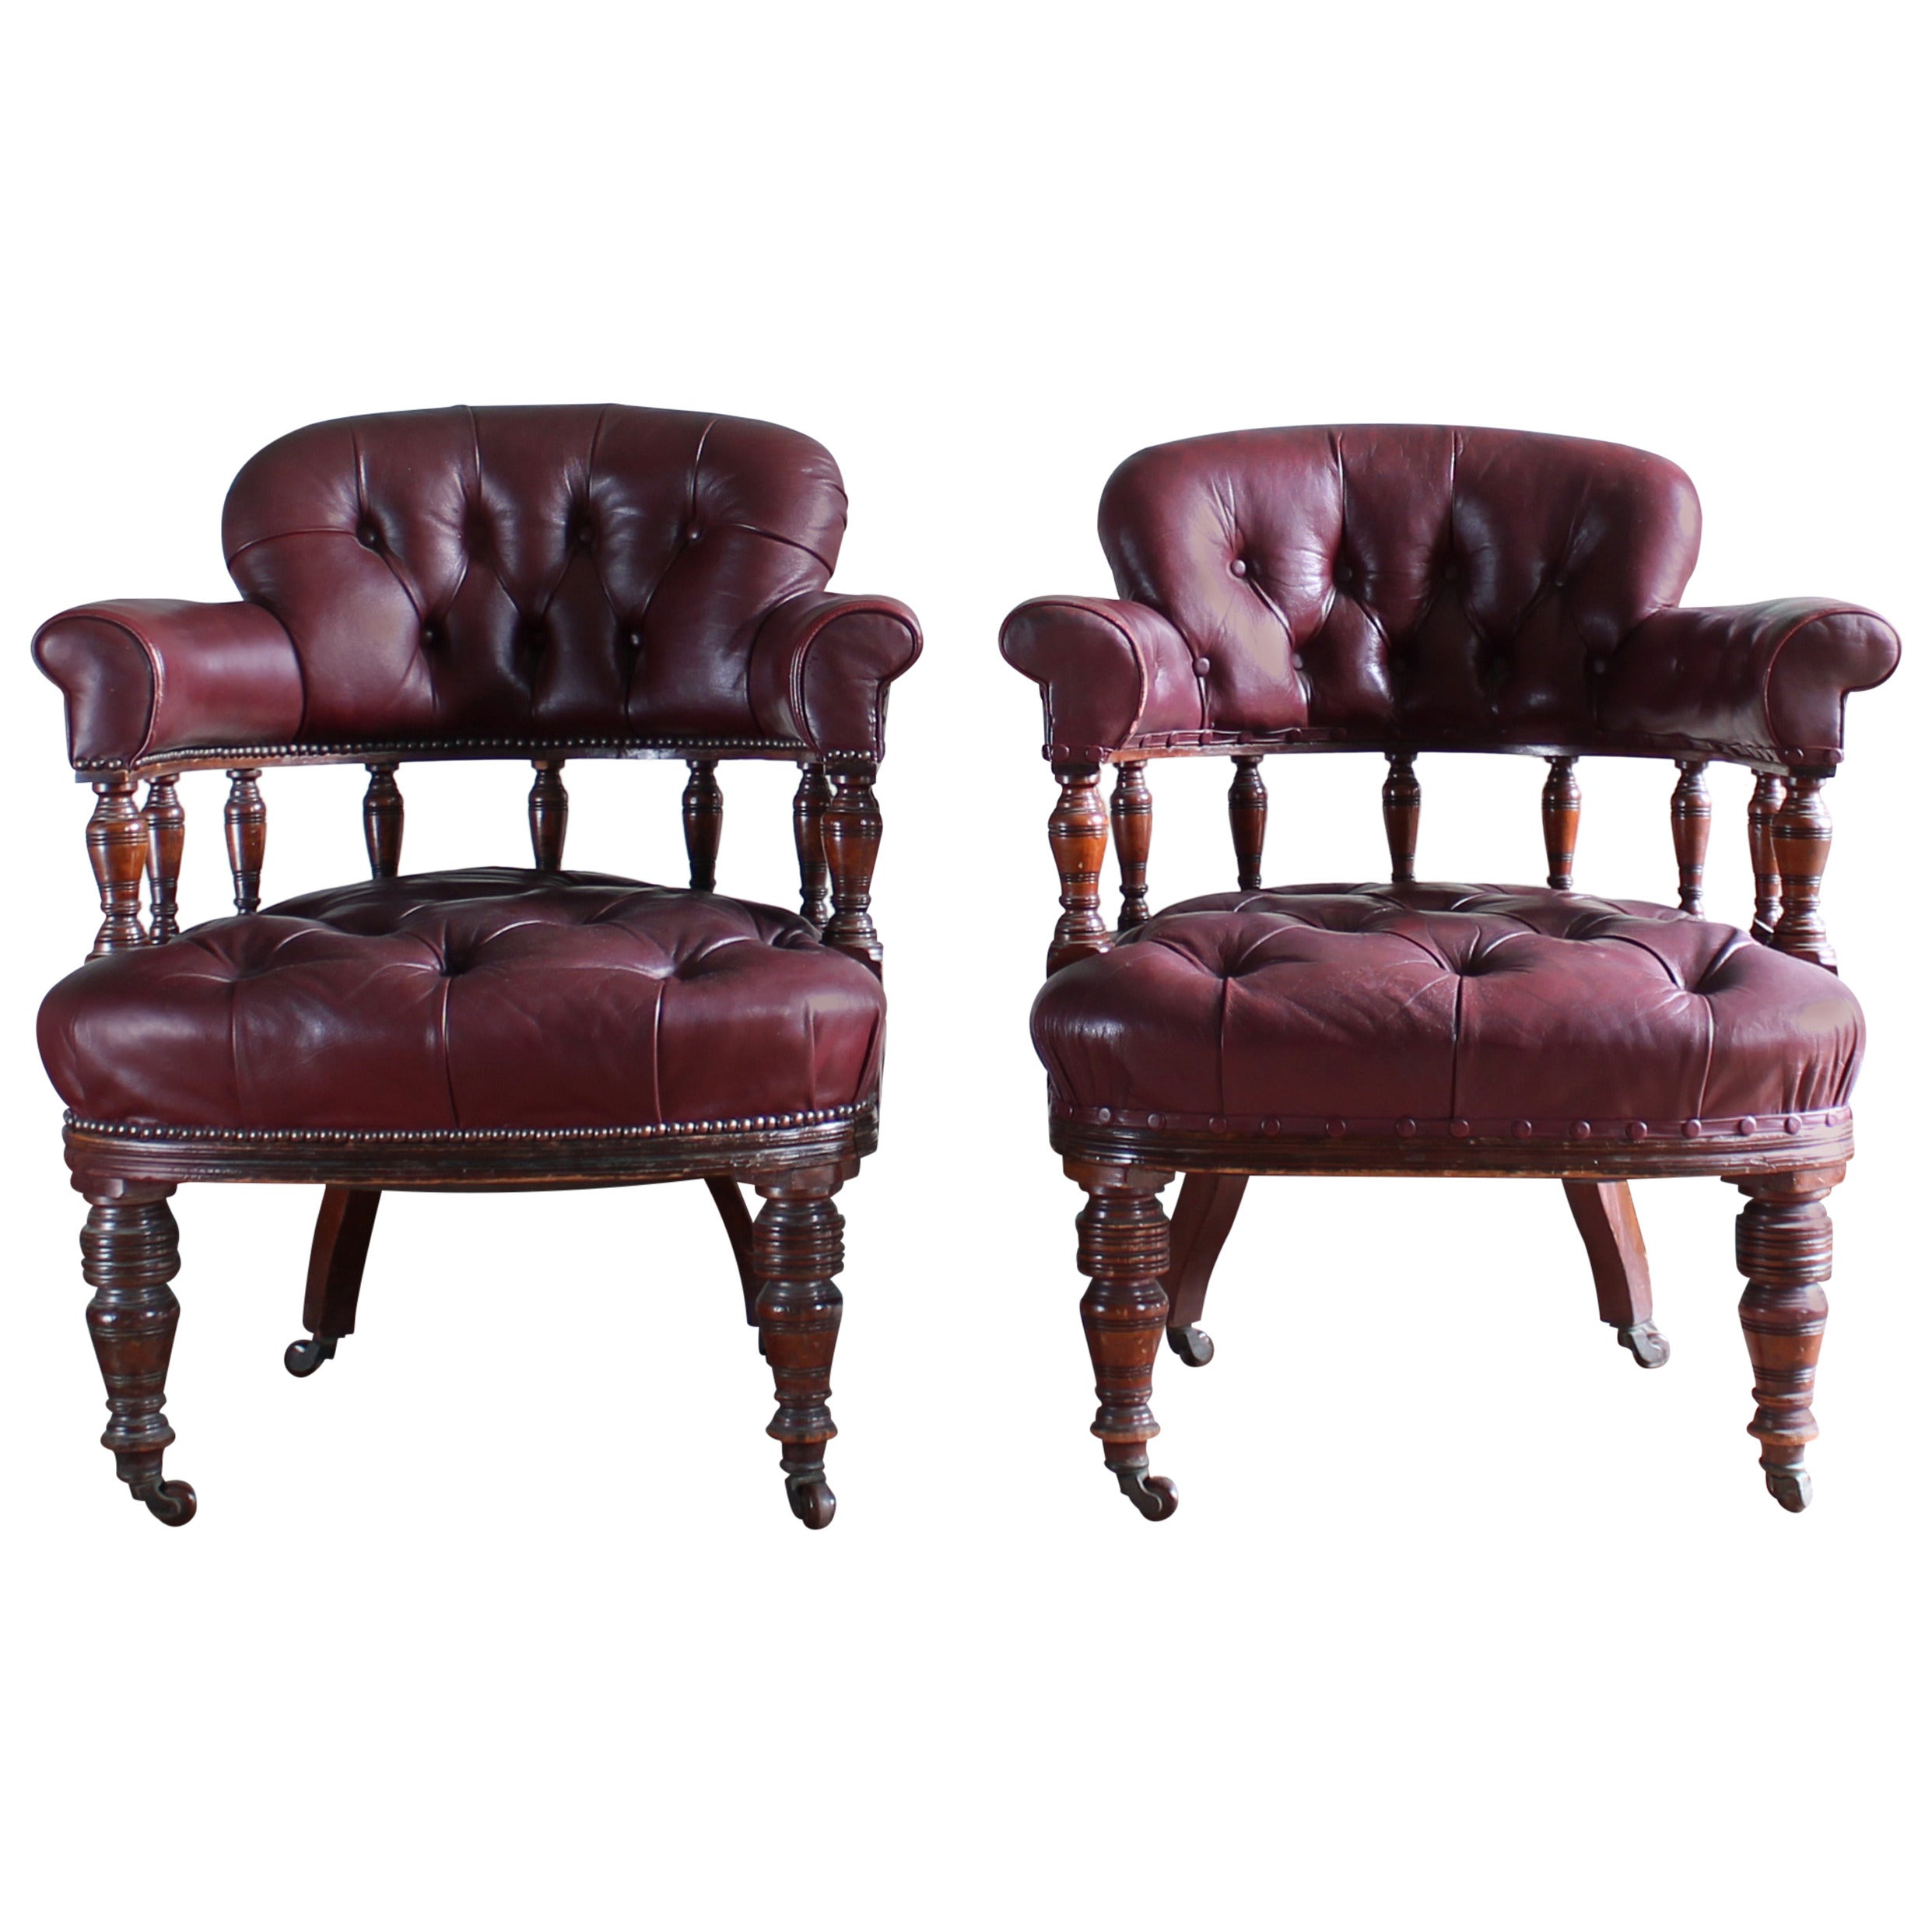 A Victorian Leather Club Chair